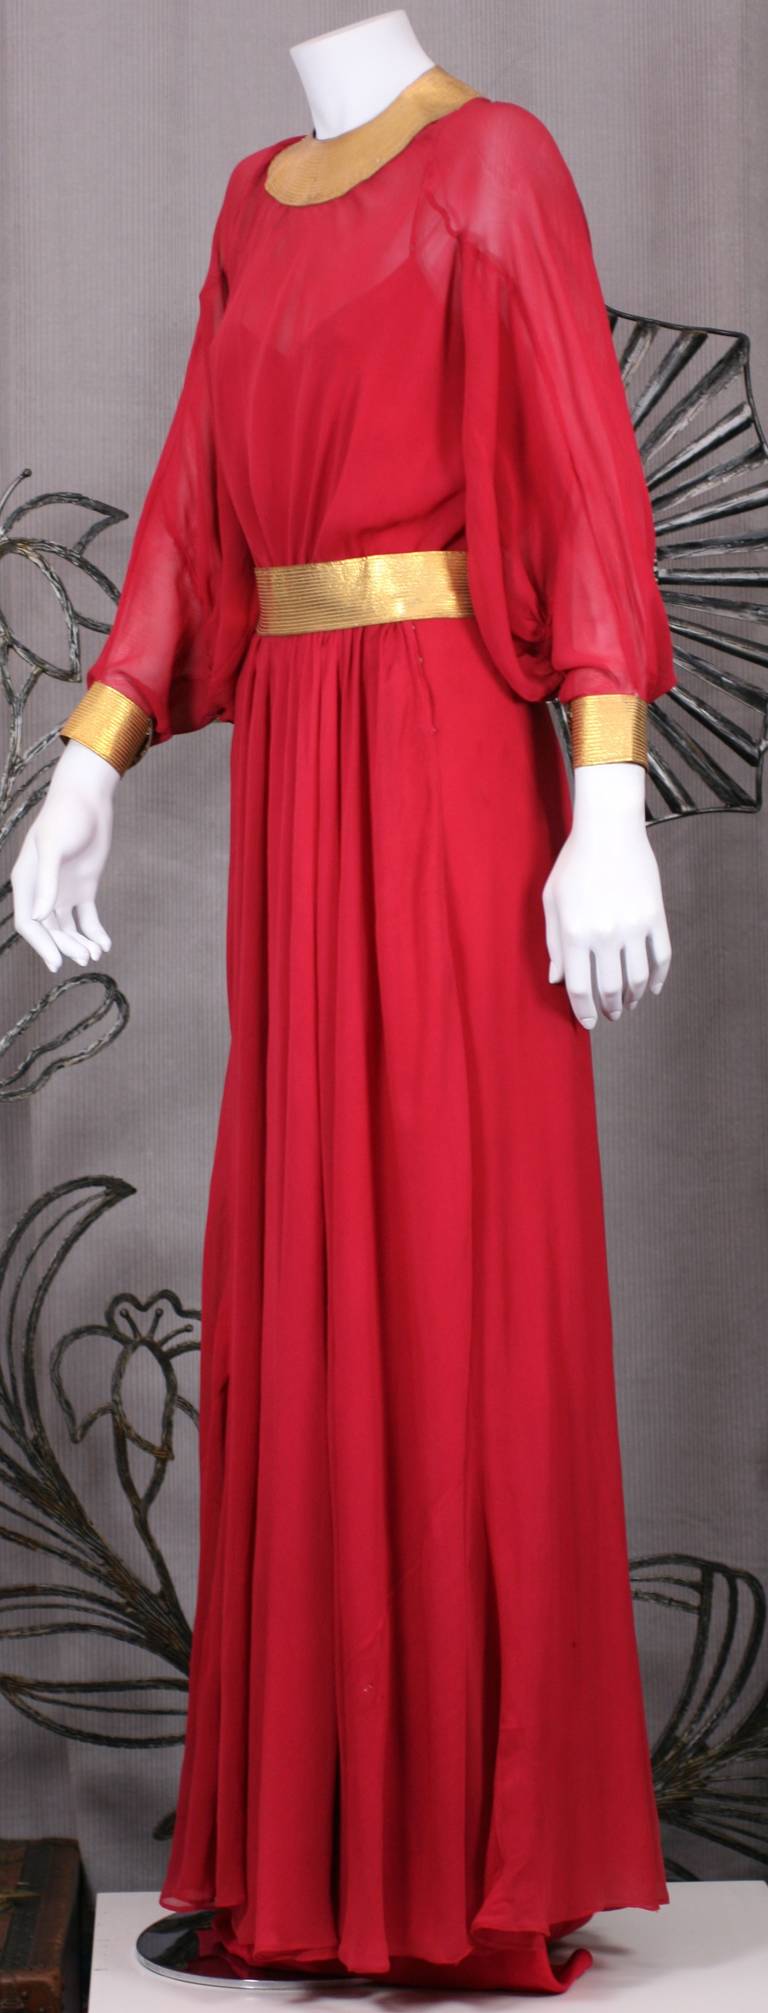 1930's Jeanne Lanvin vibrant red silk chiffon gown with signature trapunto topstitching on supplest gold kid leather. 
Elegant styling with full balloon sleeves and full circular skirt. One piece gown with gathered full skirt falling from waist.